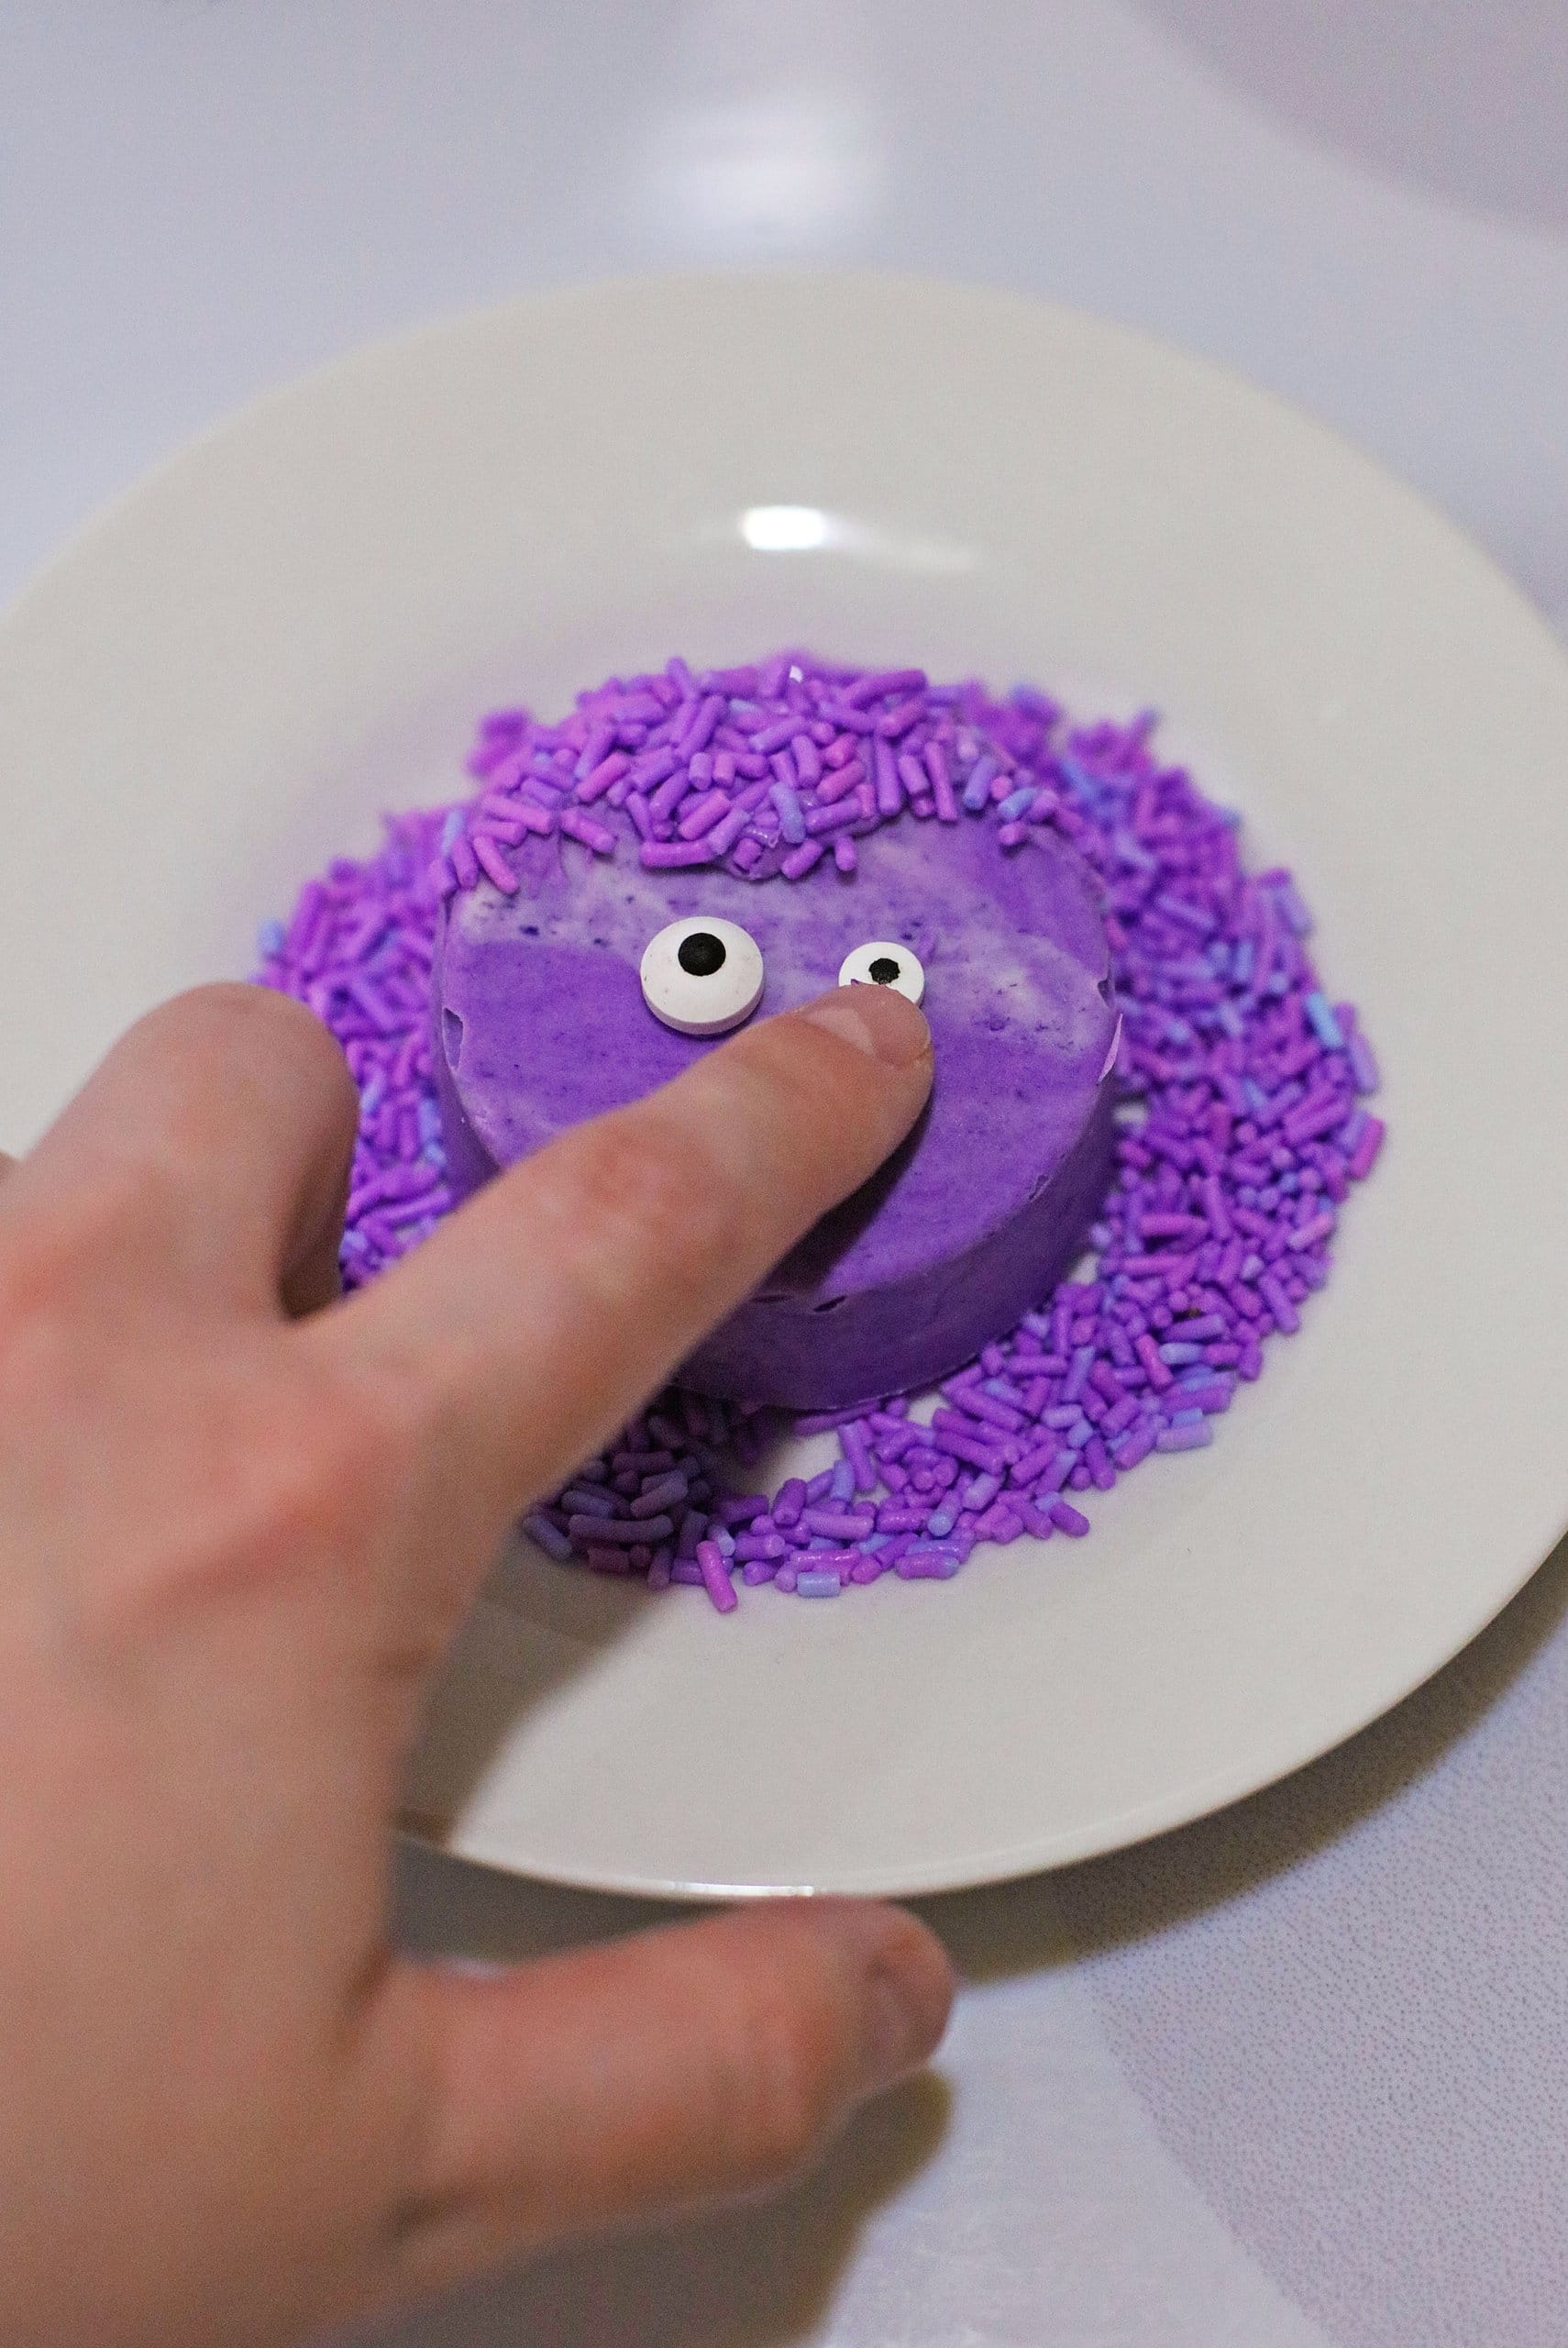 candy eyeballs being added to a purple dipped cookie